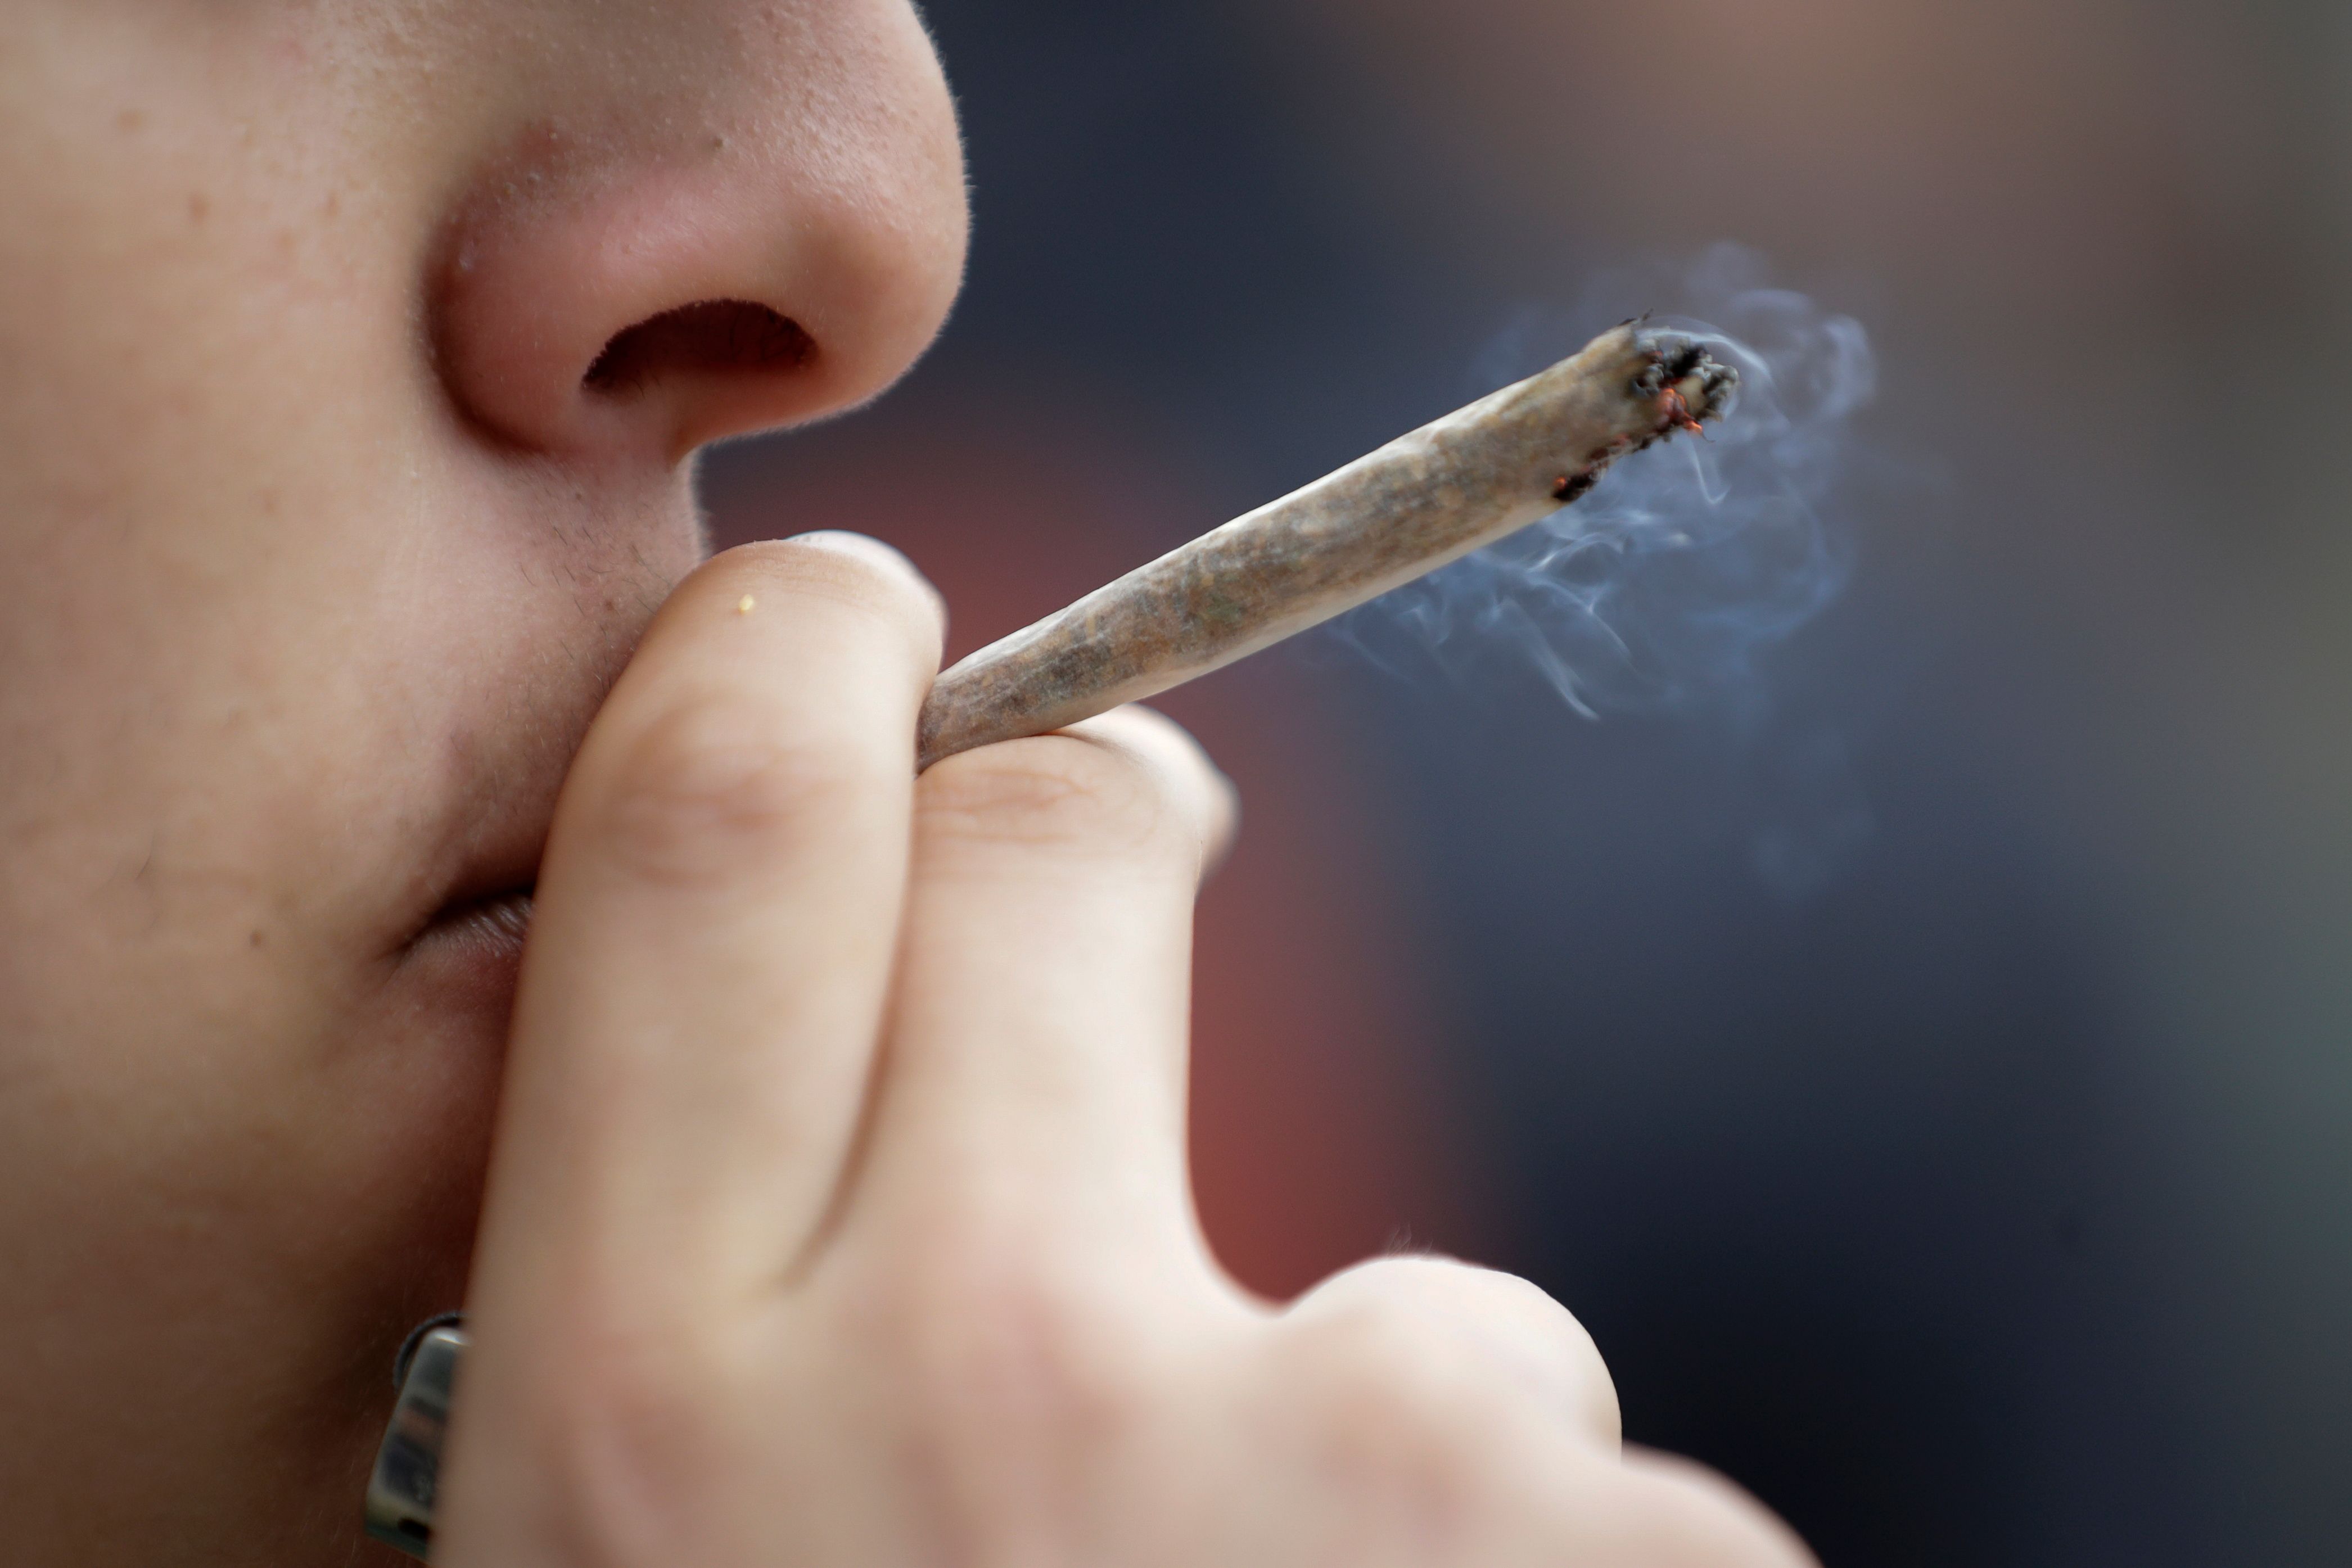 National Weed Day 2019: What Does 420 Mean?